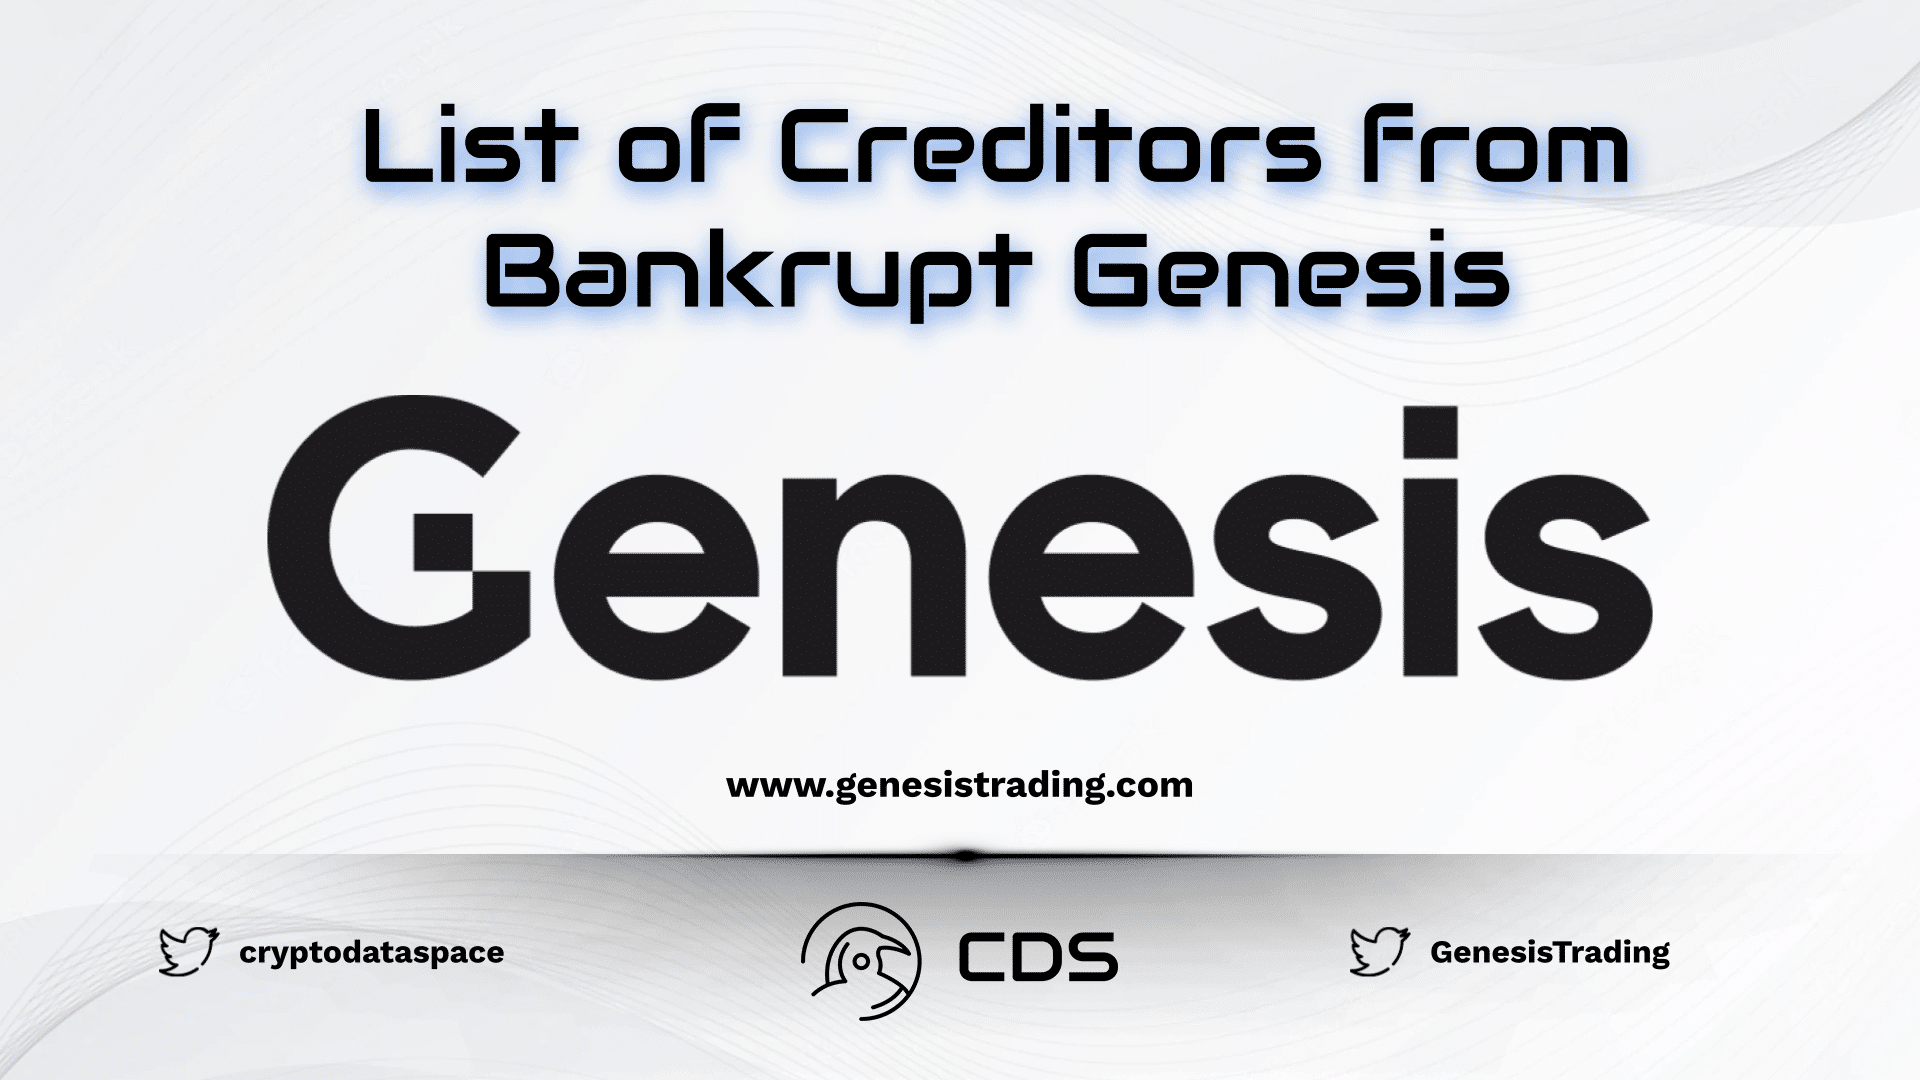 List of Creditors from Bankrupt Genesis